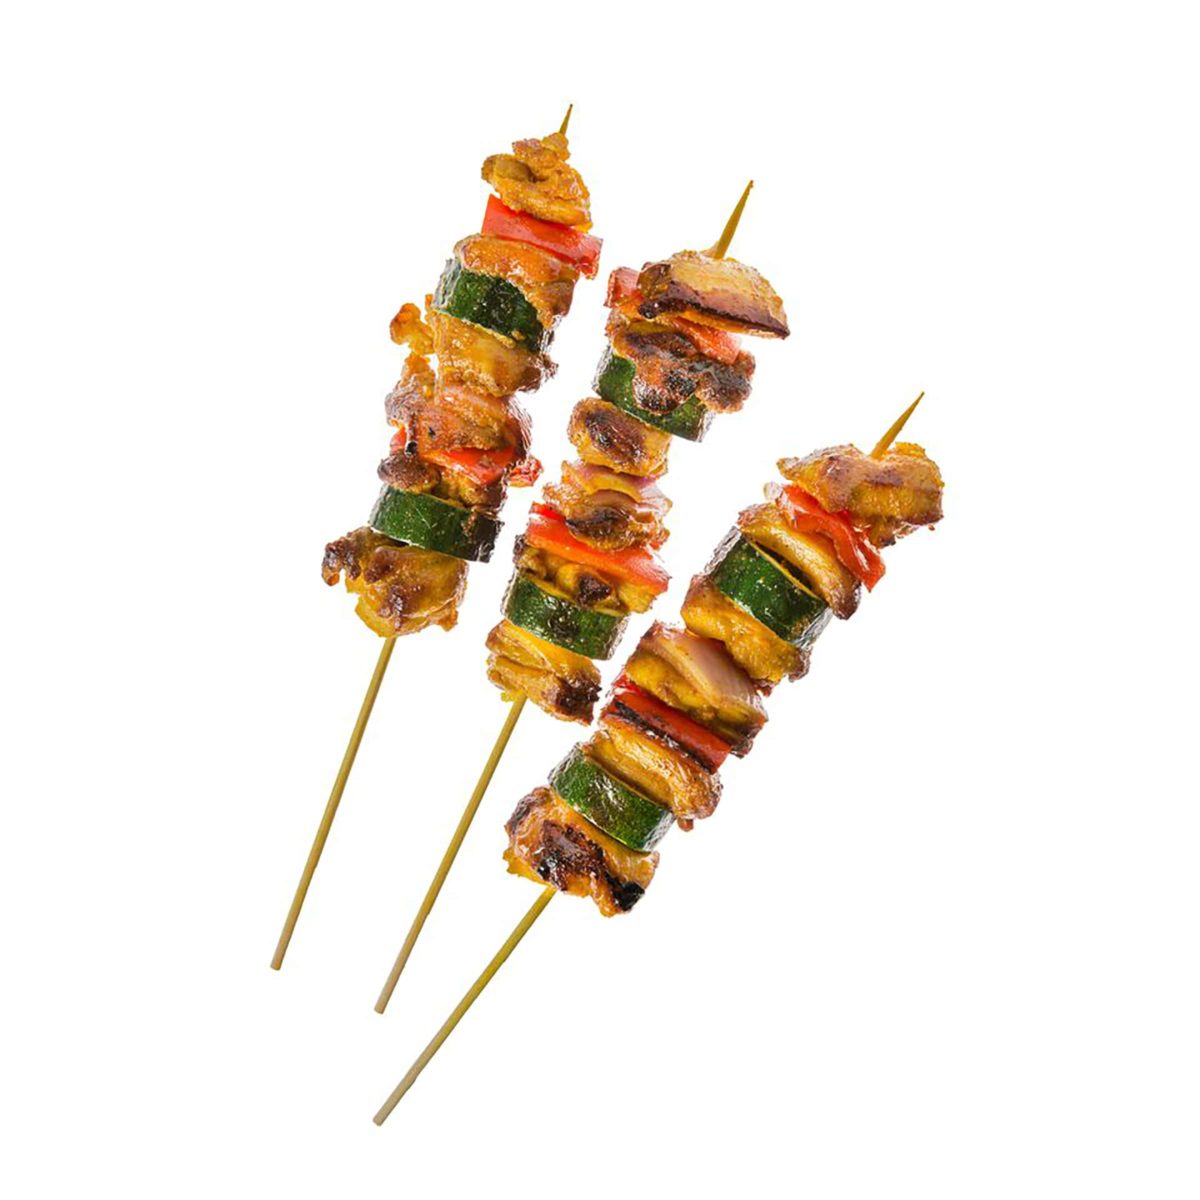 Gluten Free Turmeric Chicken and Vegetable Kabobs